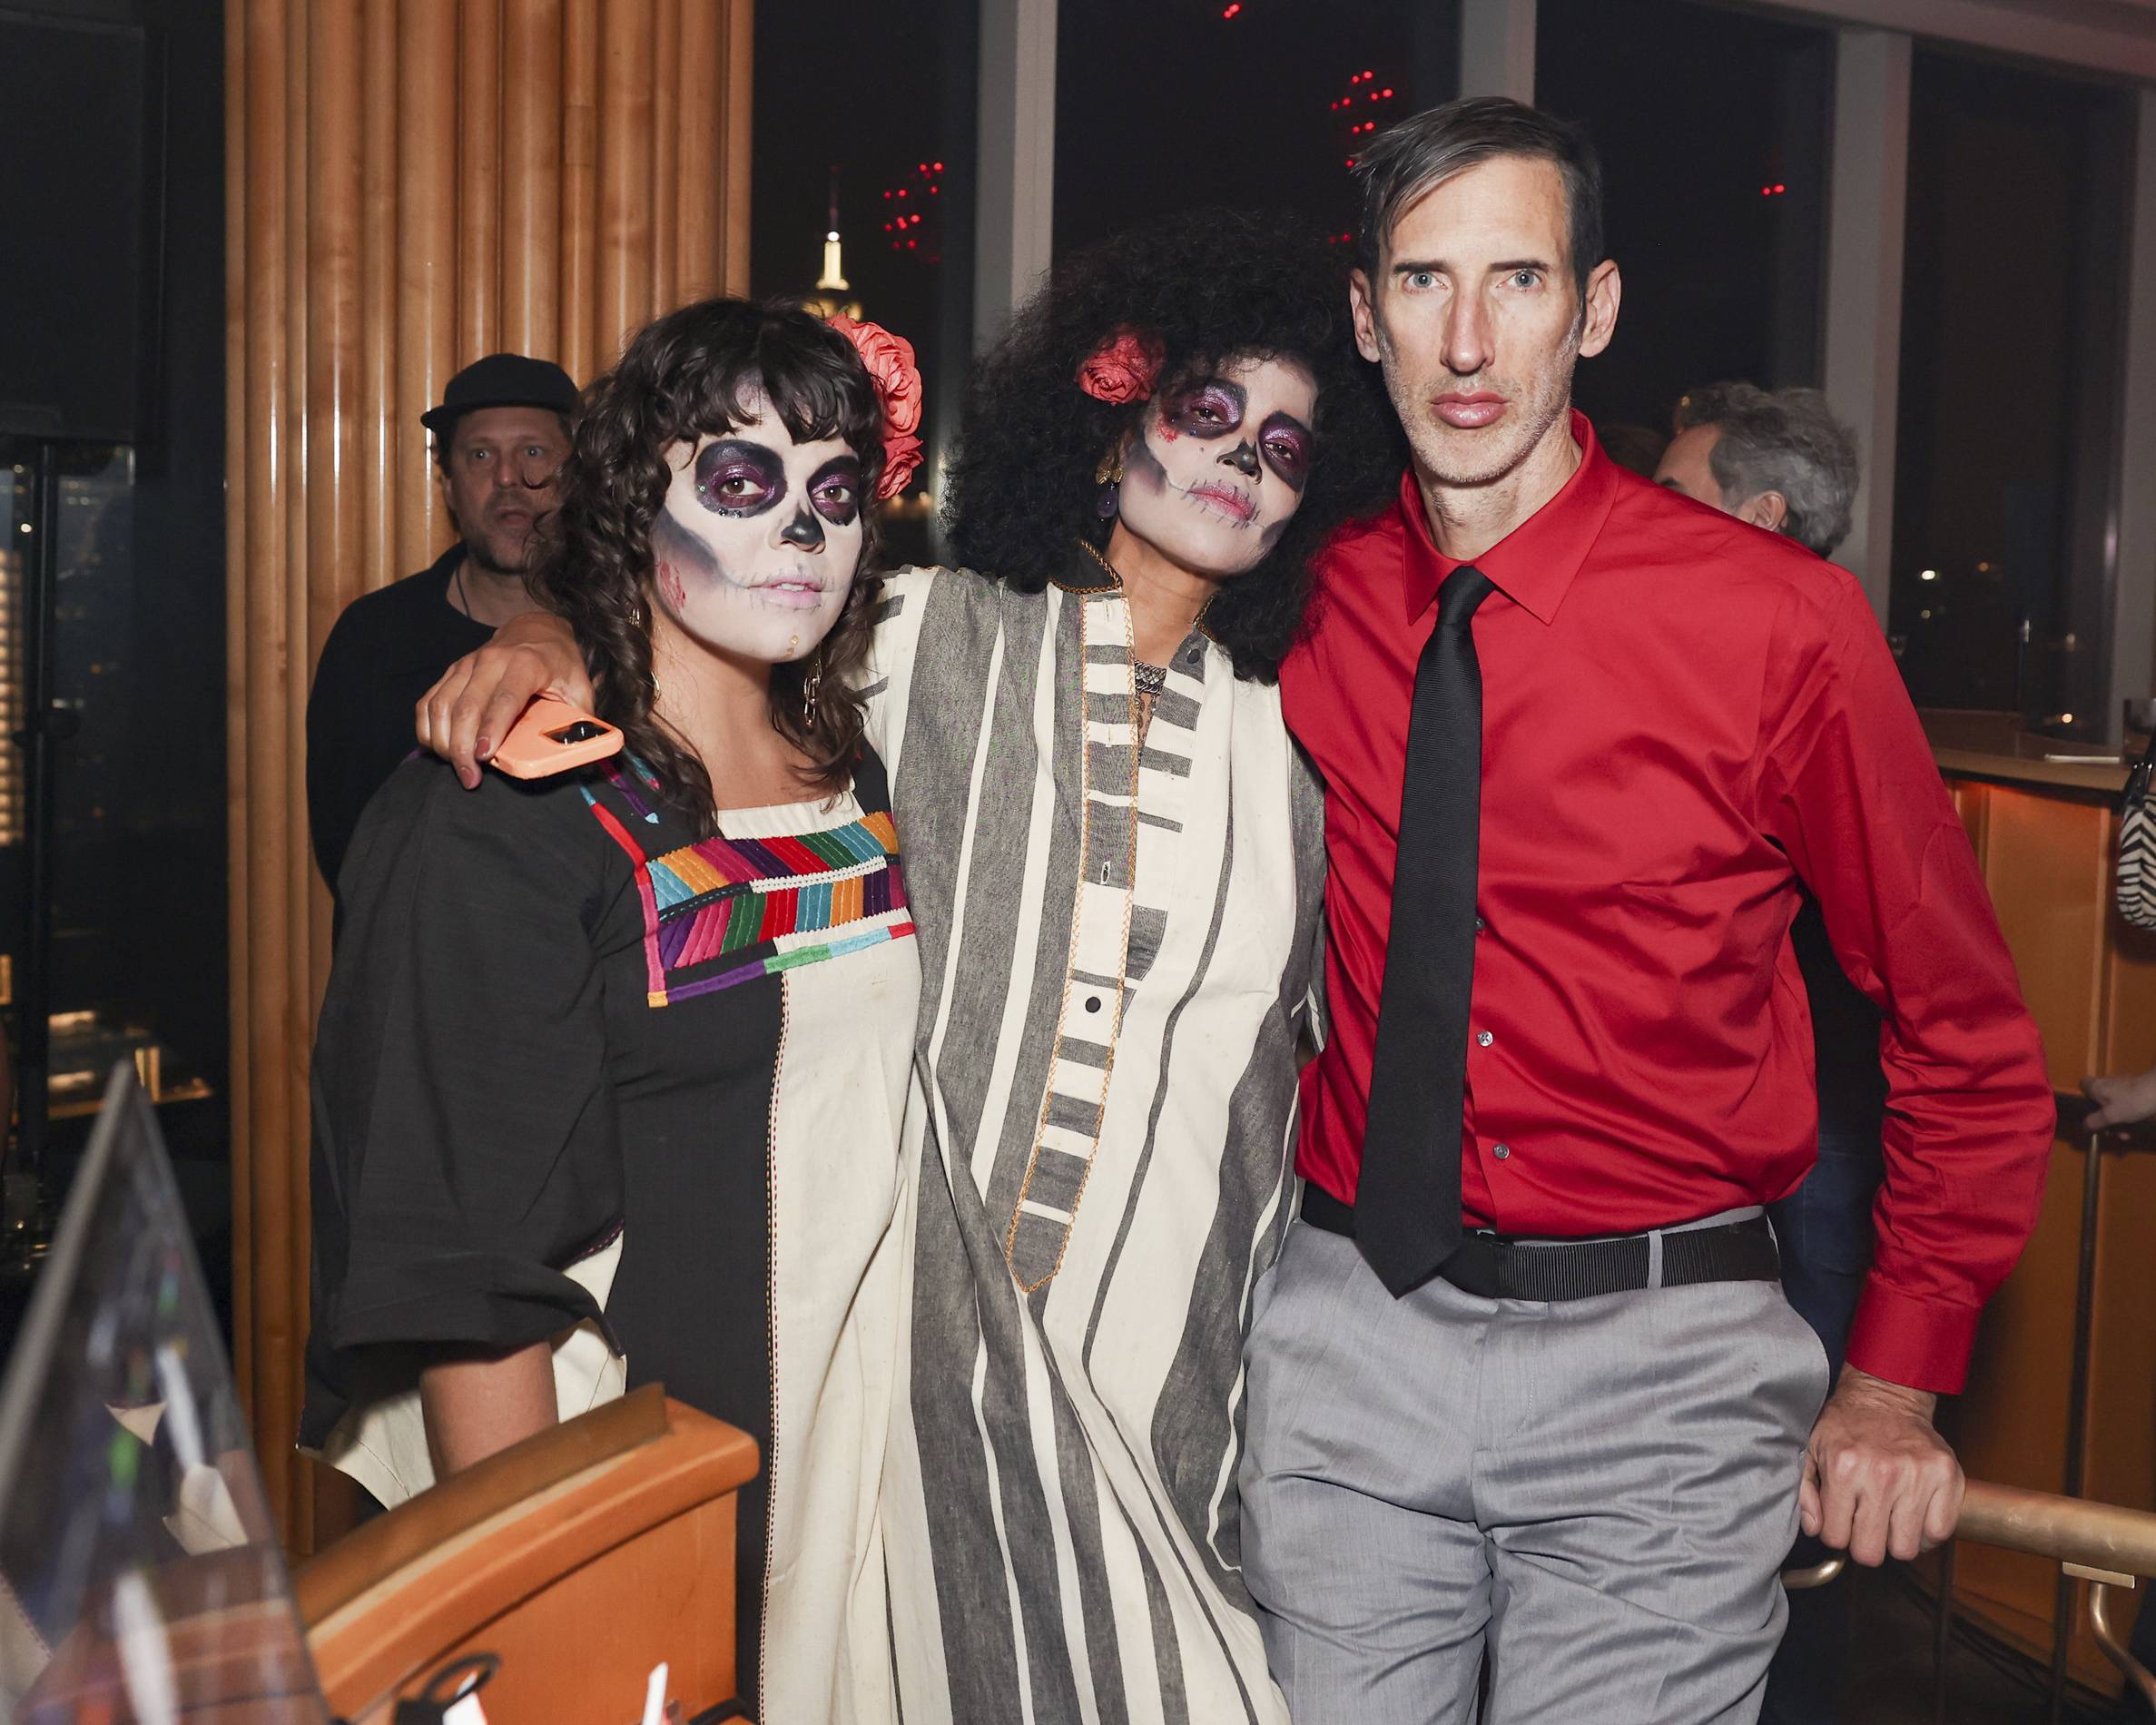 Yola Jimenez and friends pose in costume at the standard halloween party 2022